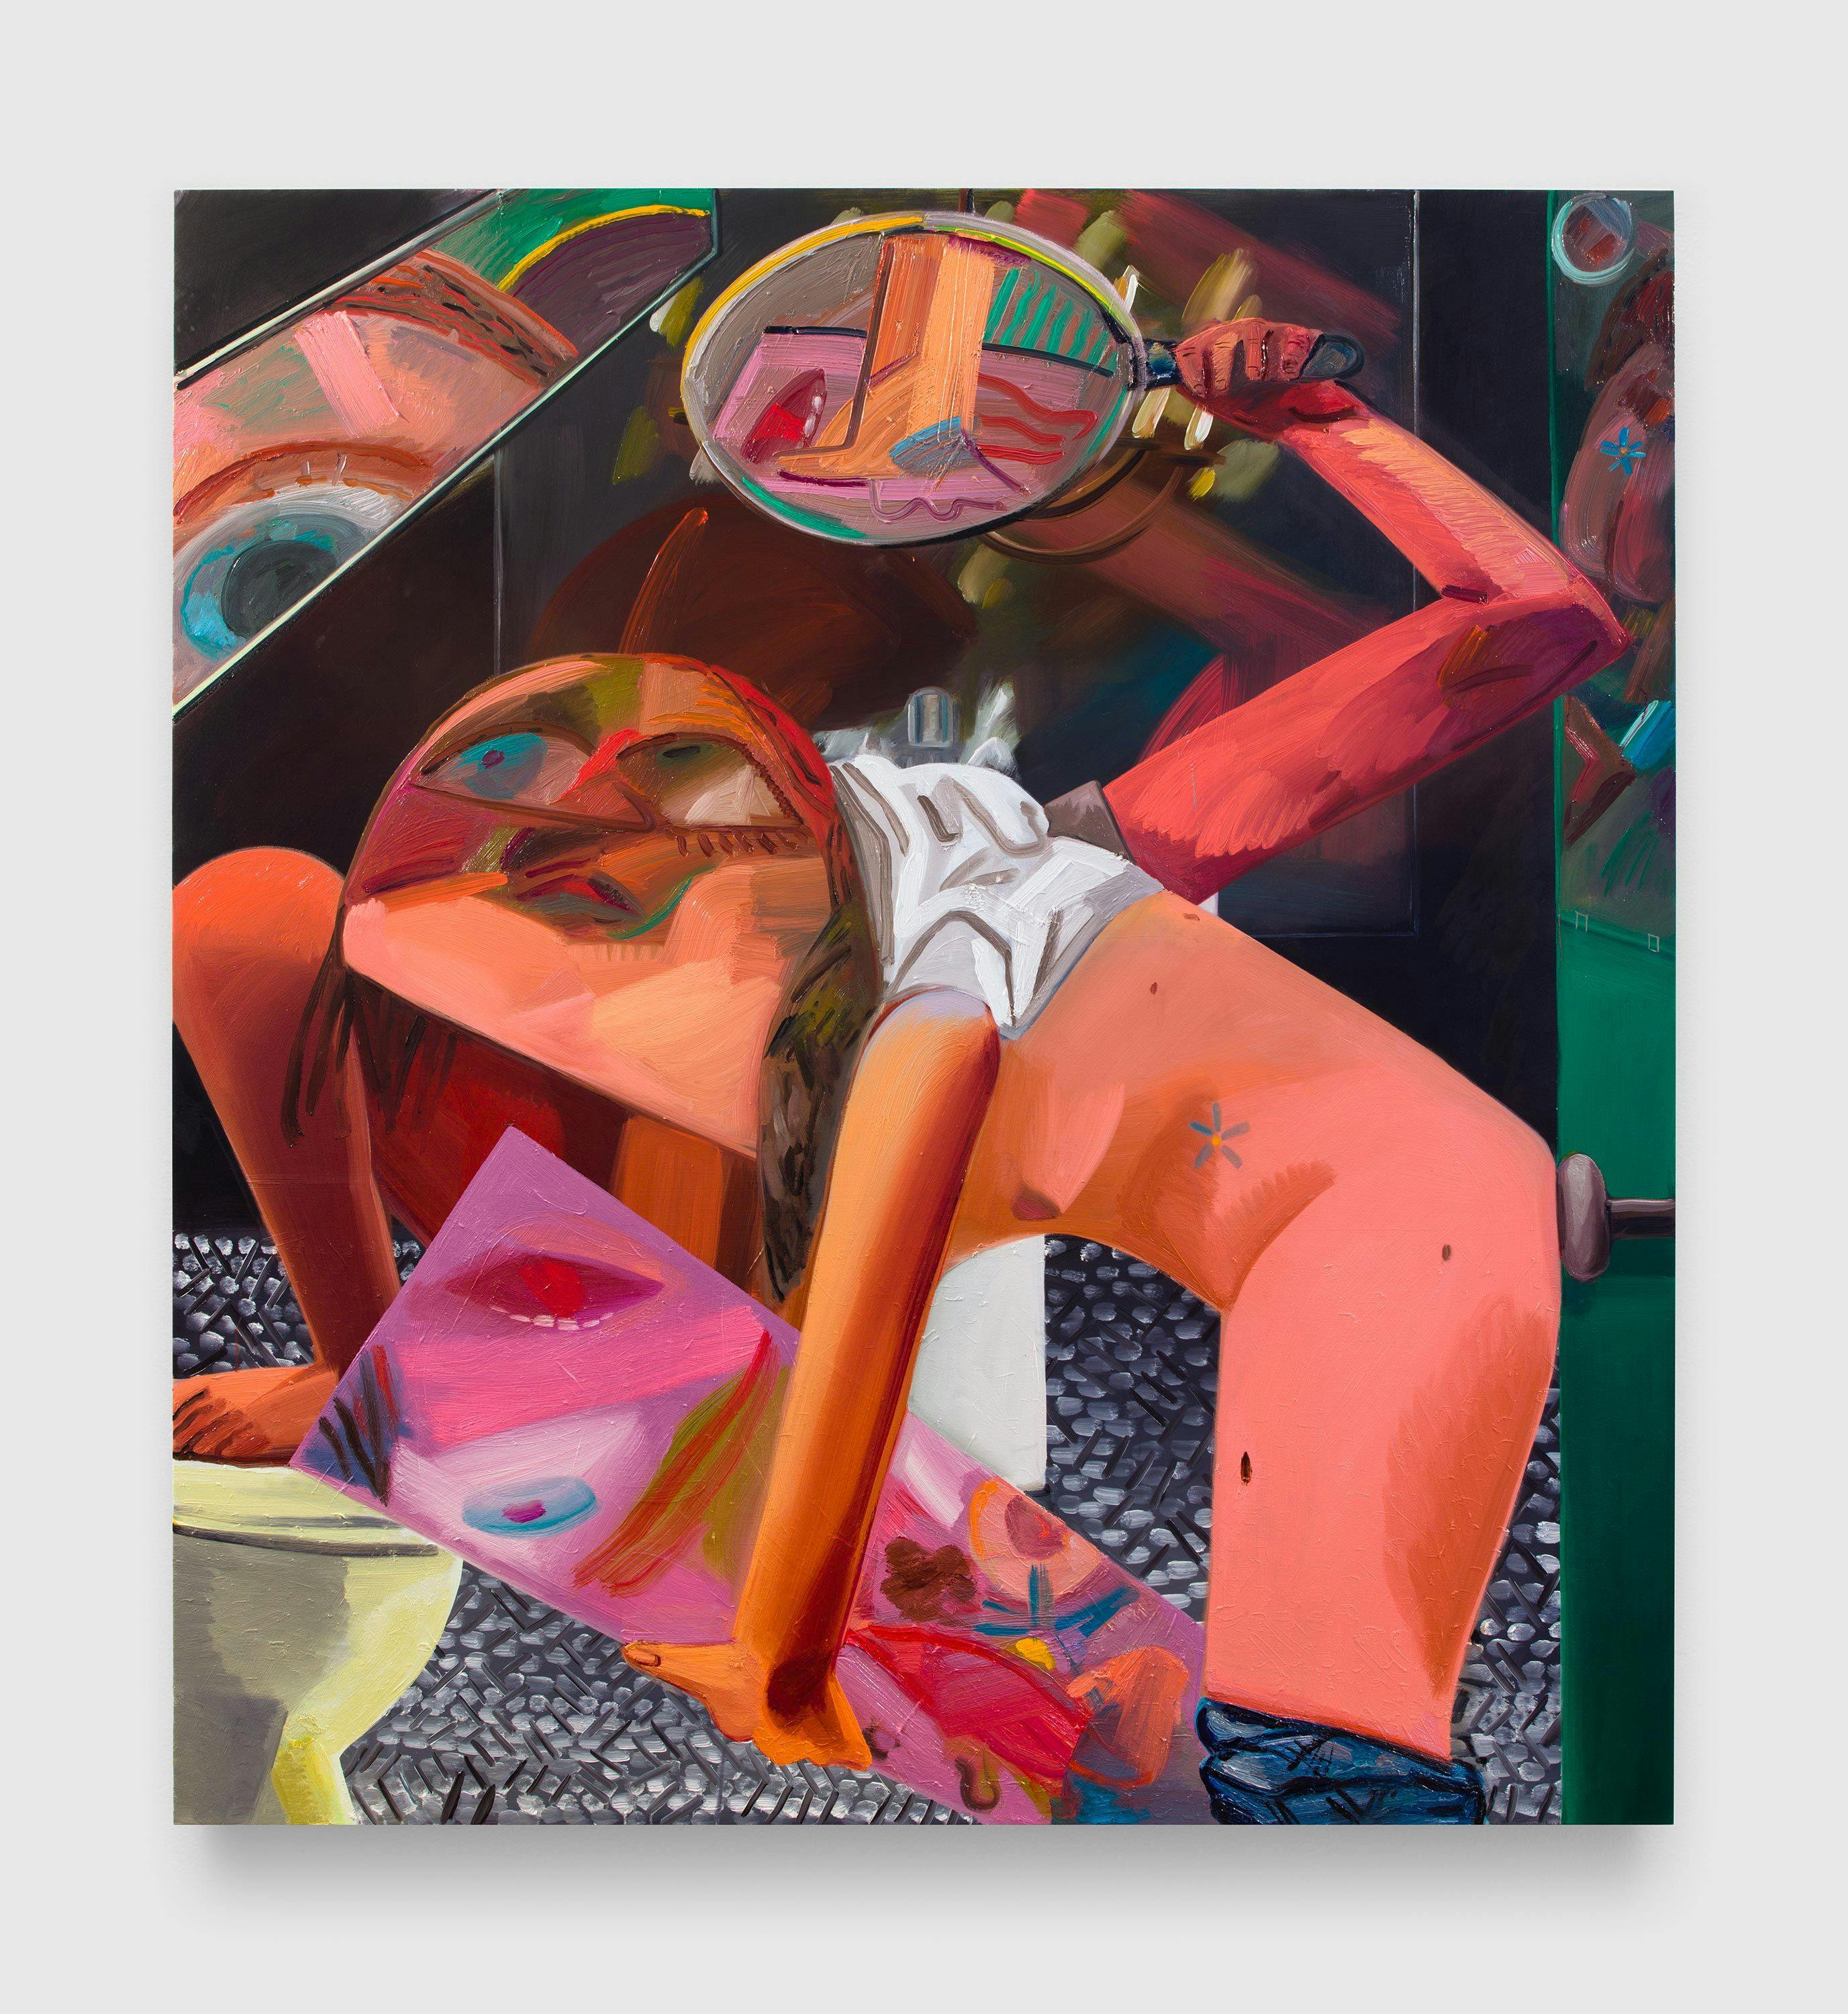 A painting by Dana Schutz, titled Self-Exam, dated 2017.